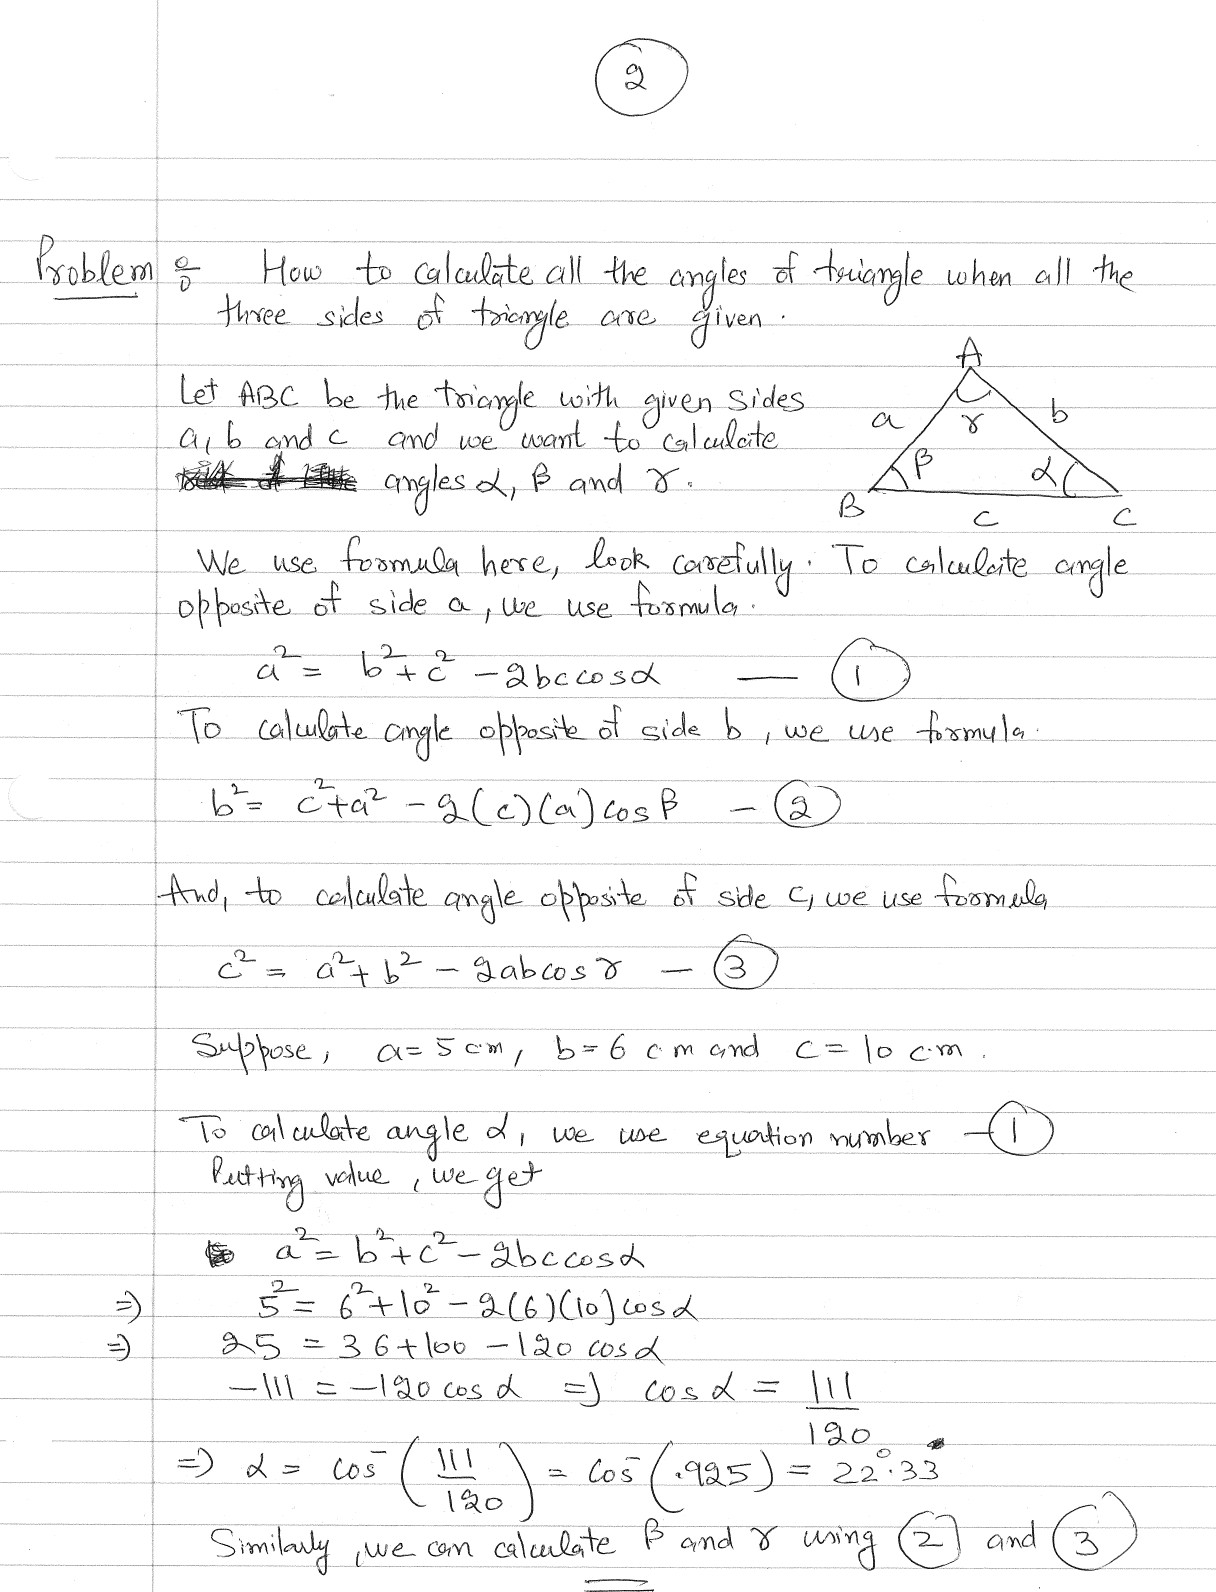 Finding all angles of triangle when all the sides of triangle are given